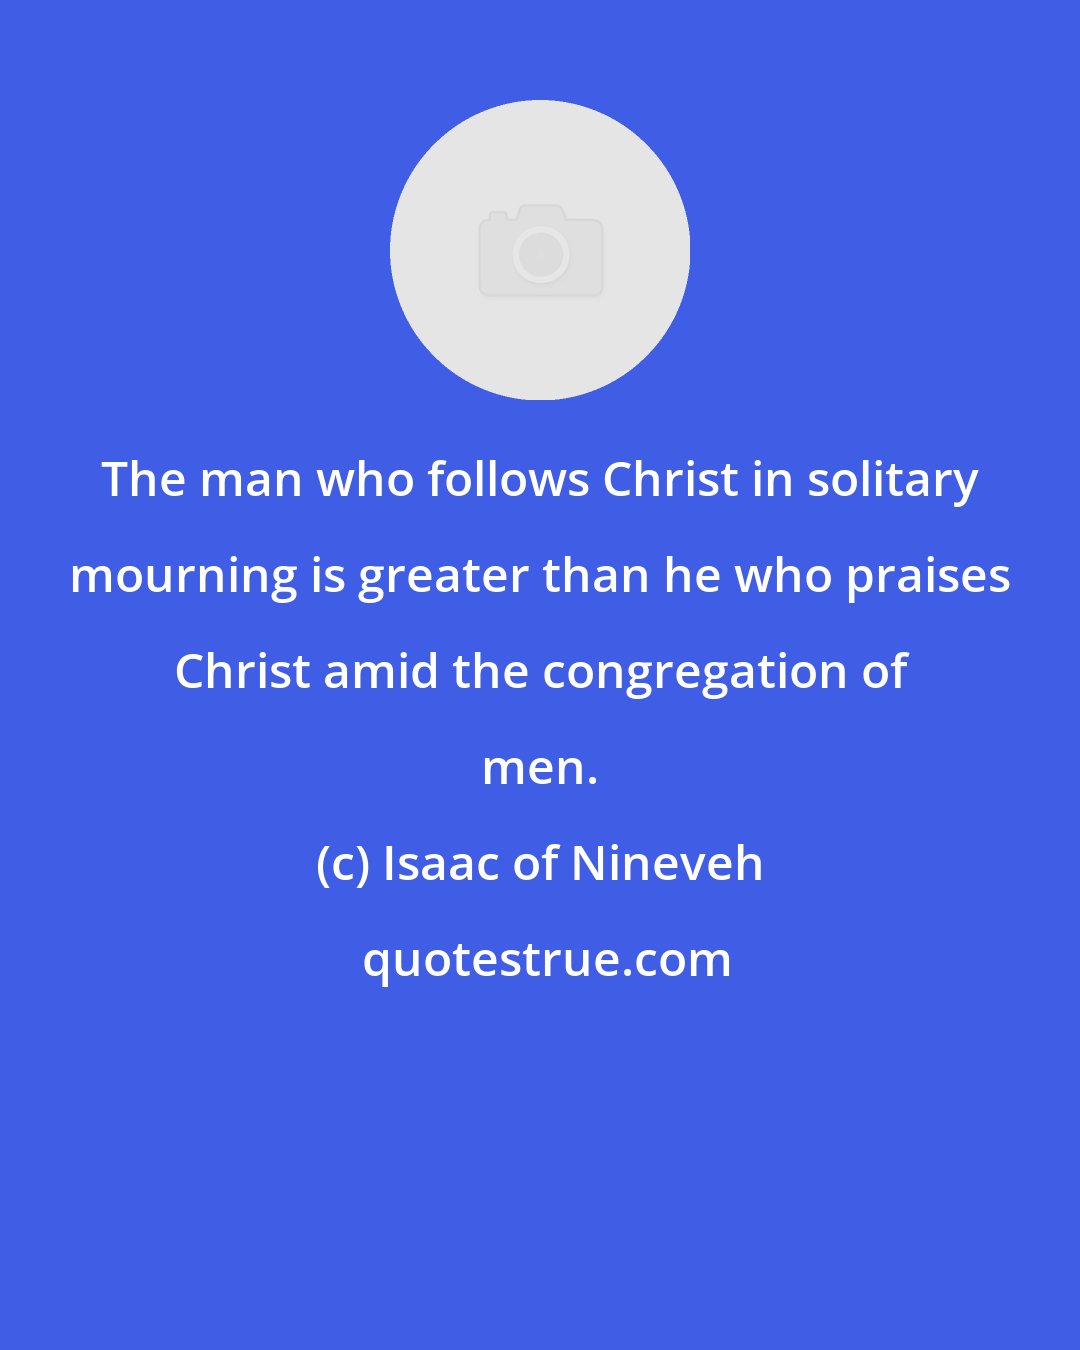 Isaac of Nineveh: The man who follows Christ in solitary mourning is greater than he who praises Christ amid the congregation of men.